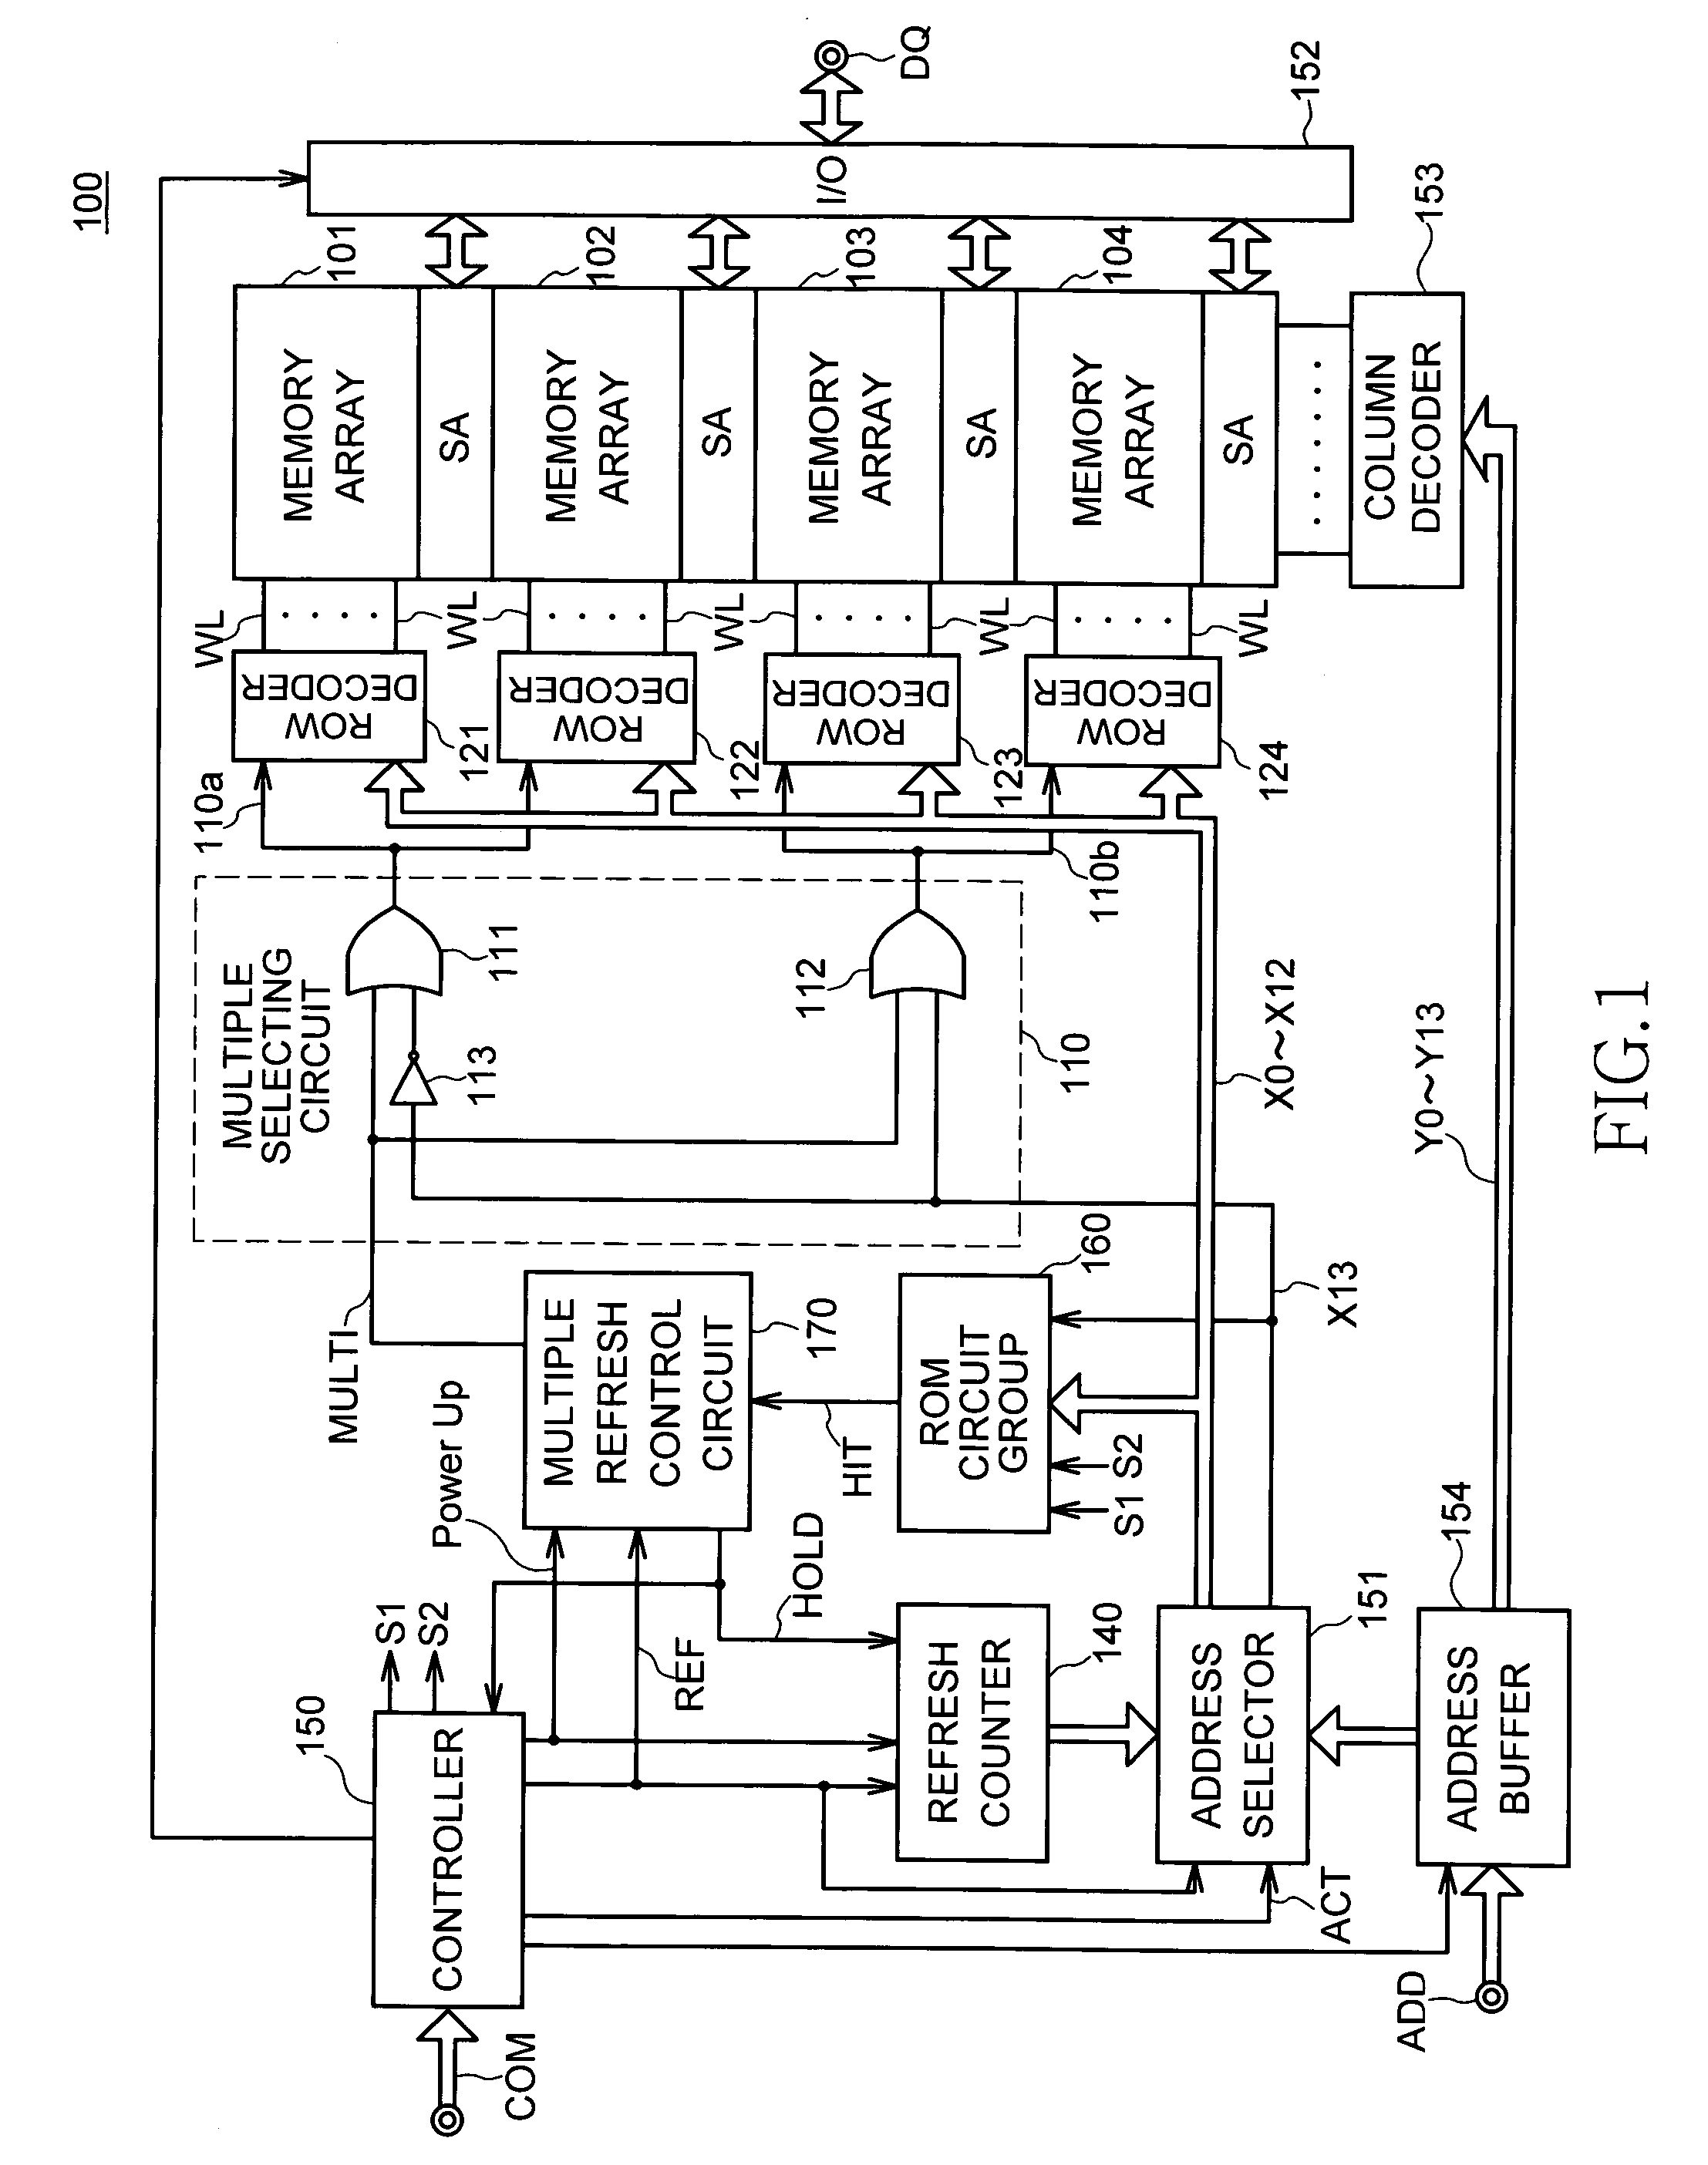 Semiconductor memory device that requires refresh operations